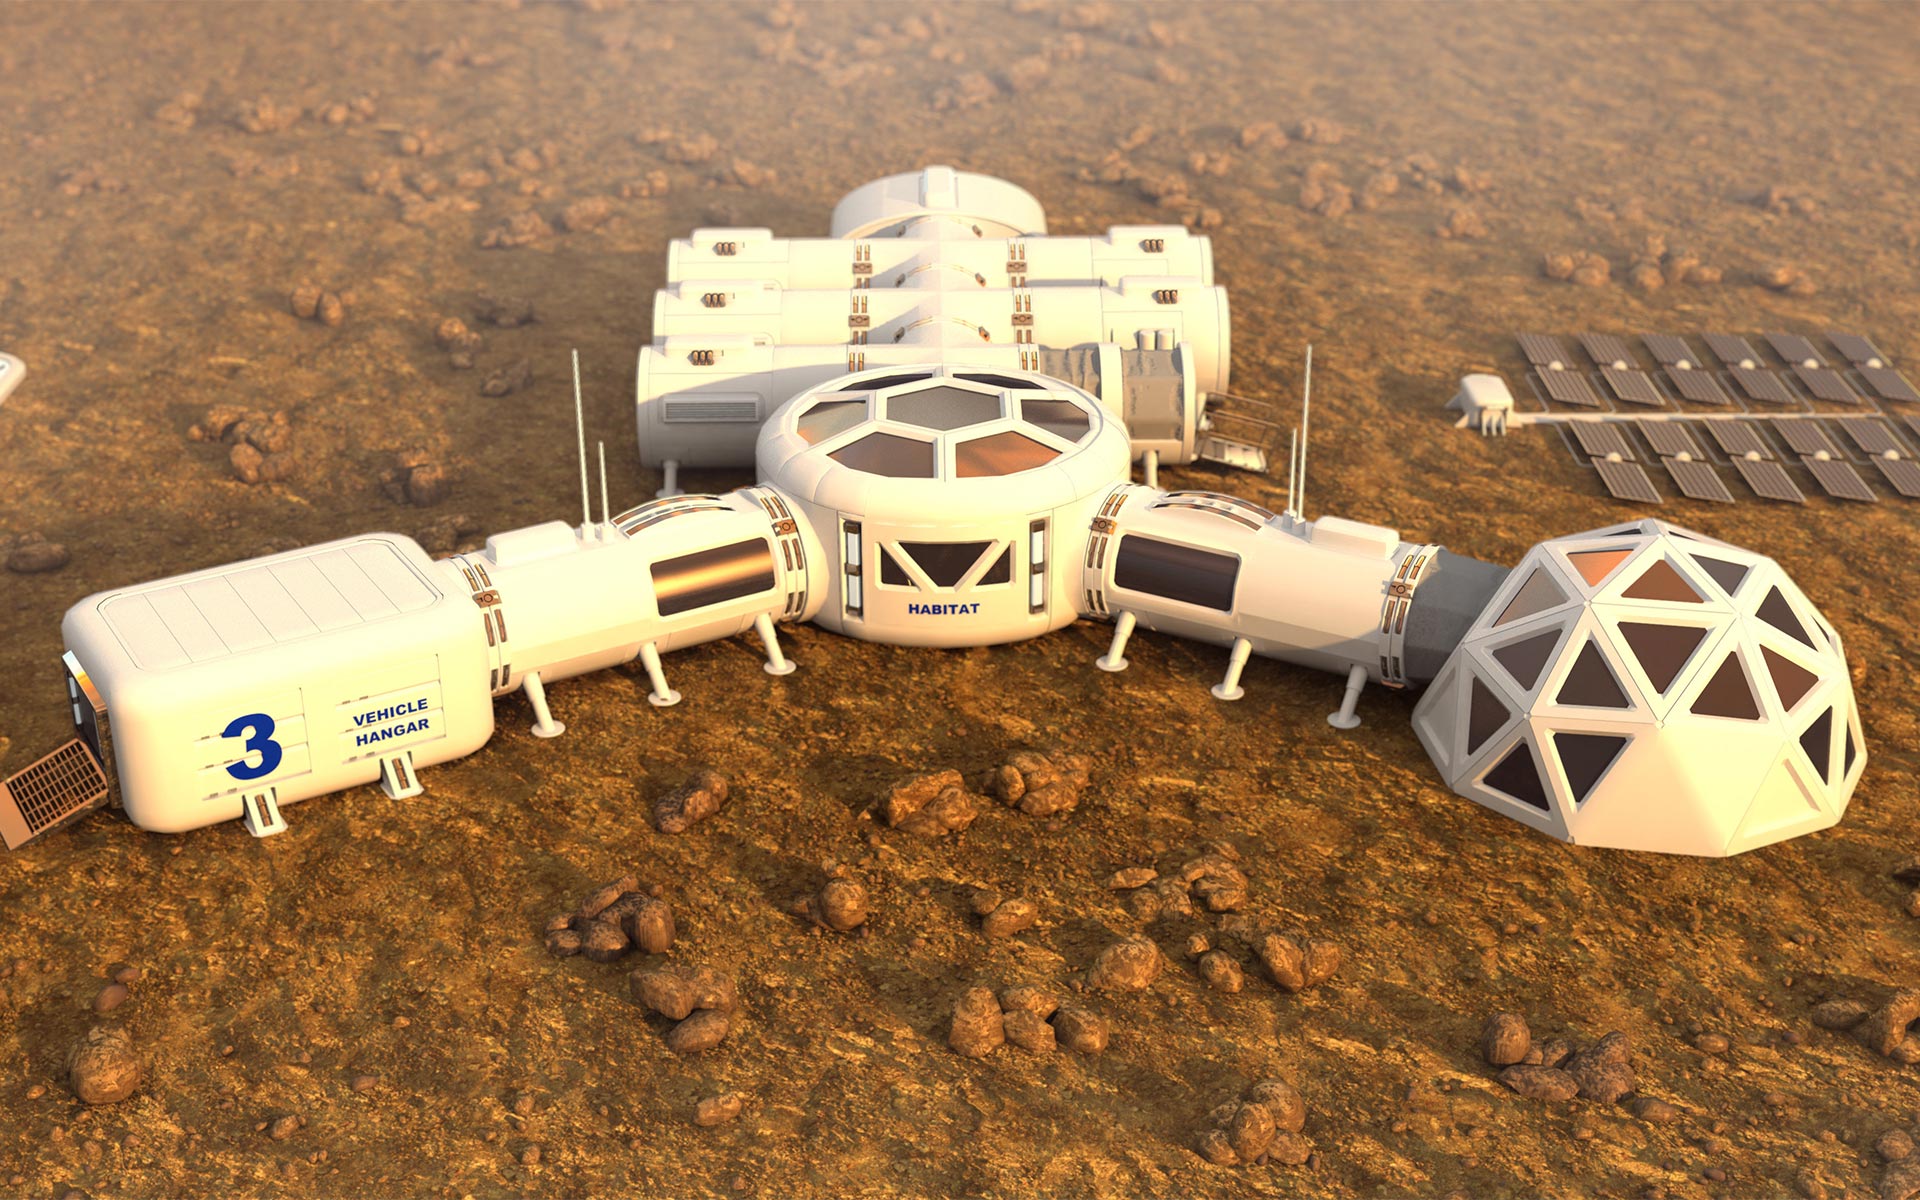 3D render of a human habitat on another planet